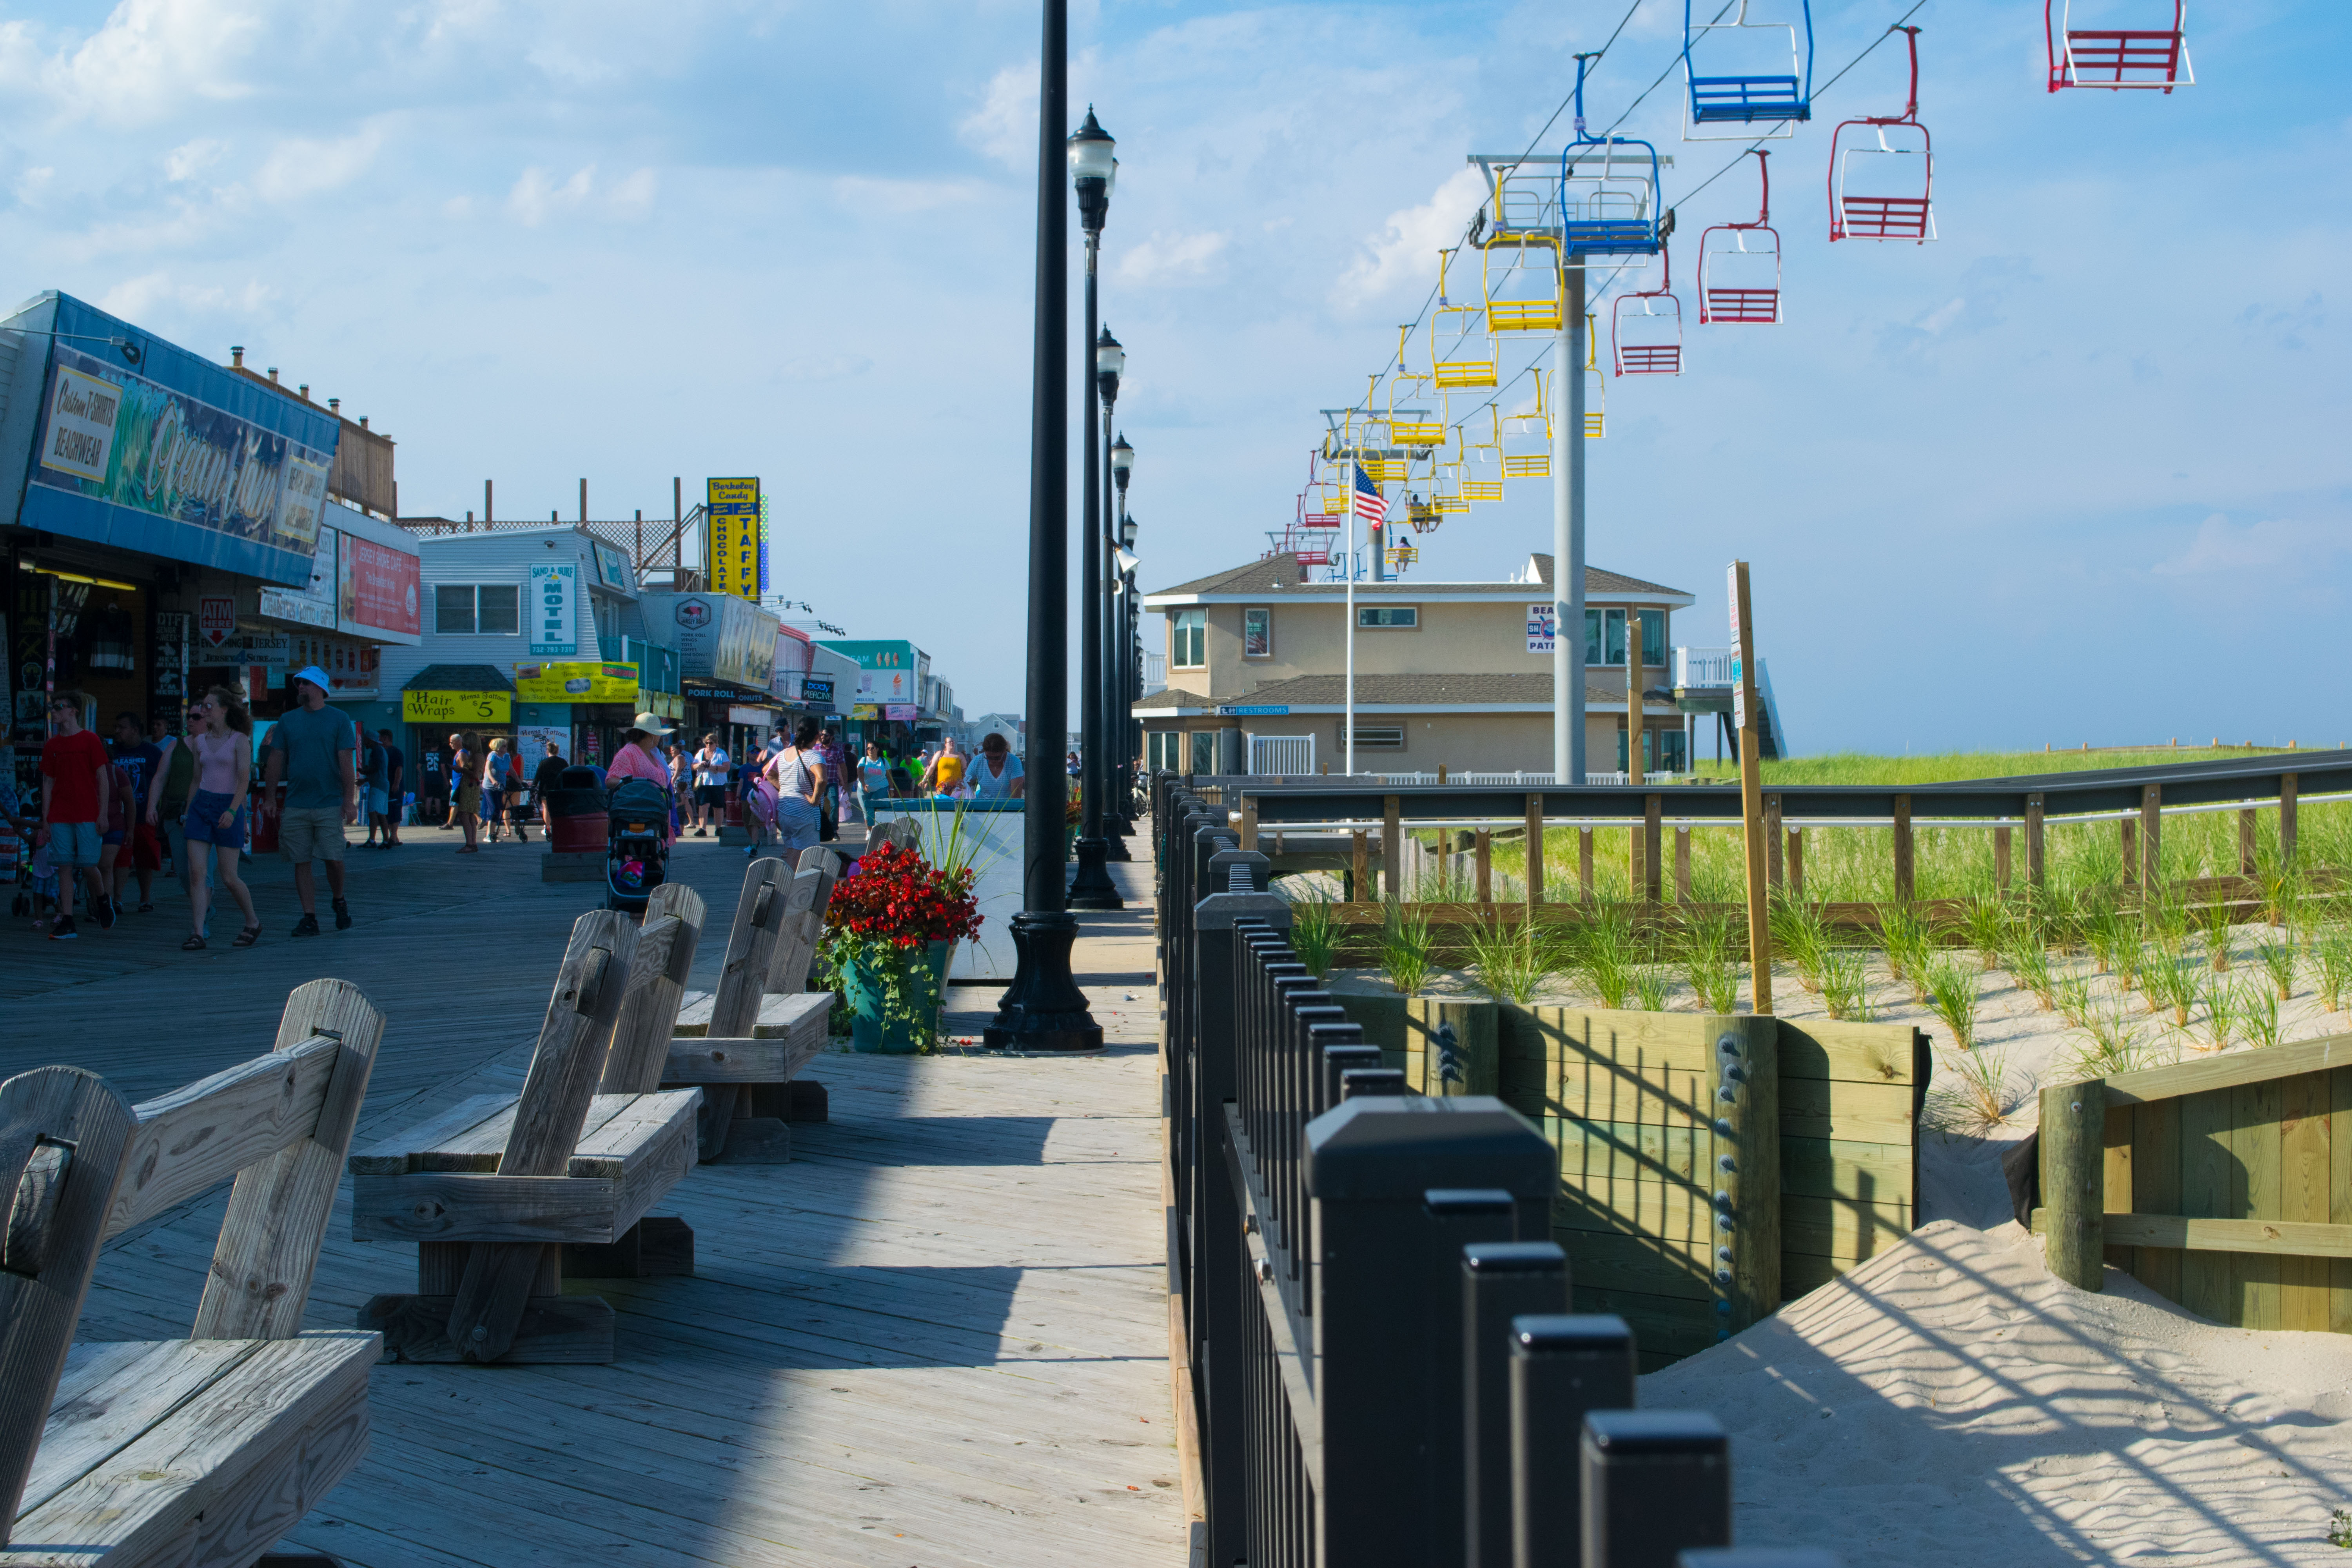 The northern portion of the Seaside Heights boardwalk, July 2019. (Photo: Daniel Nee)